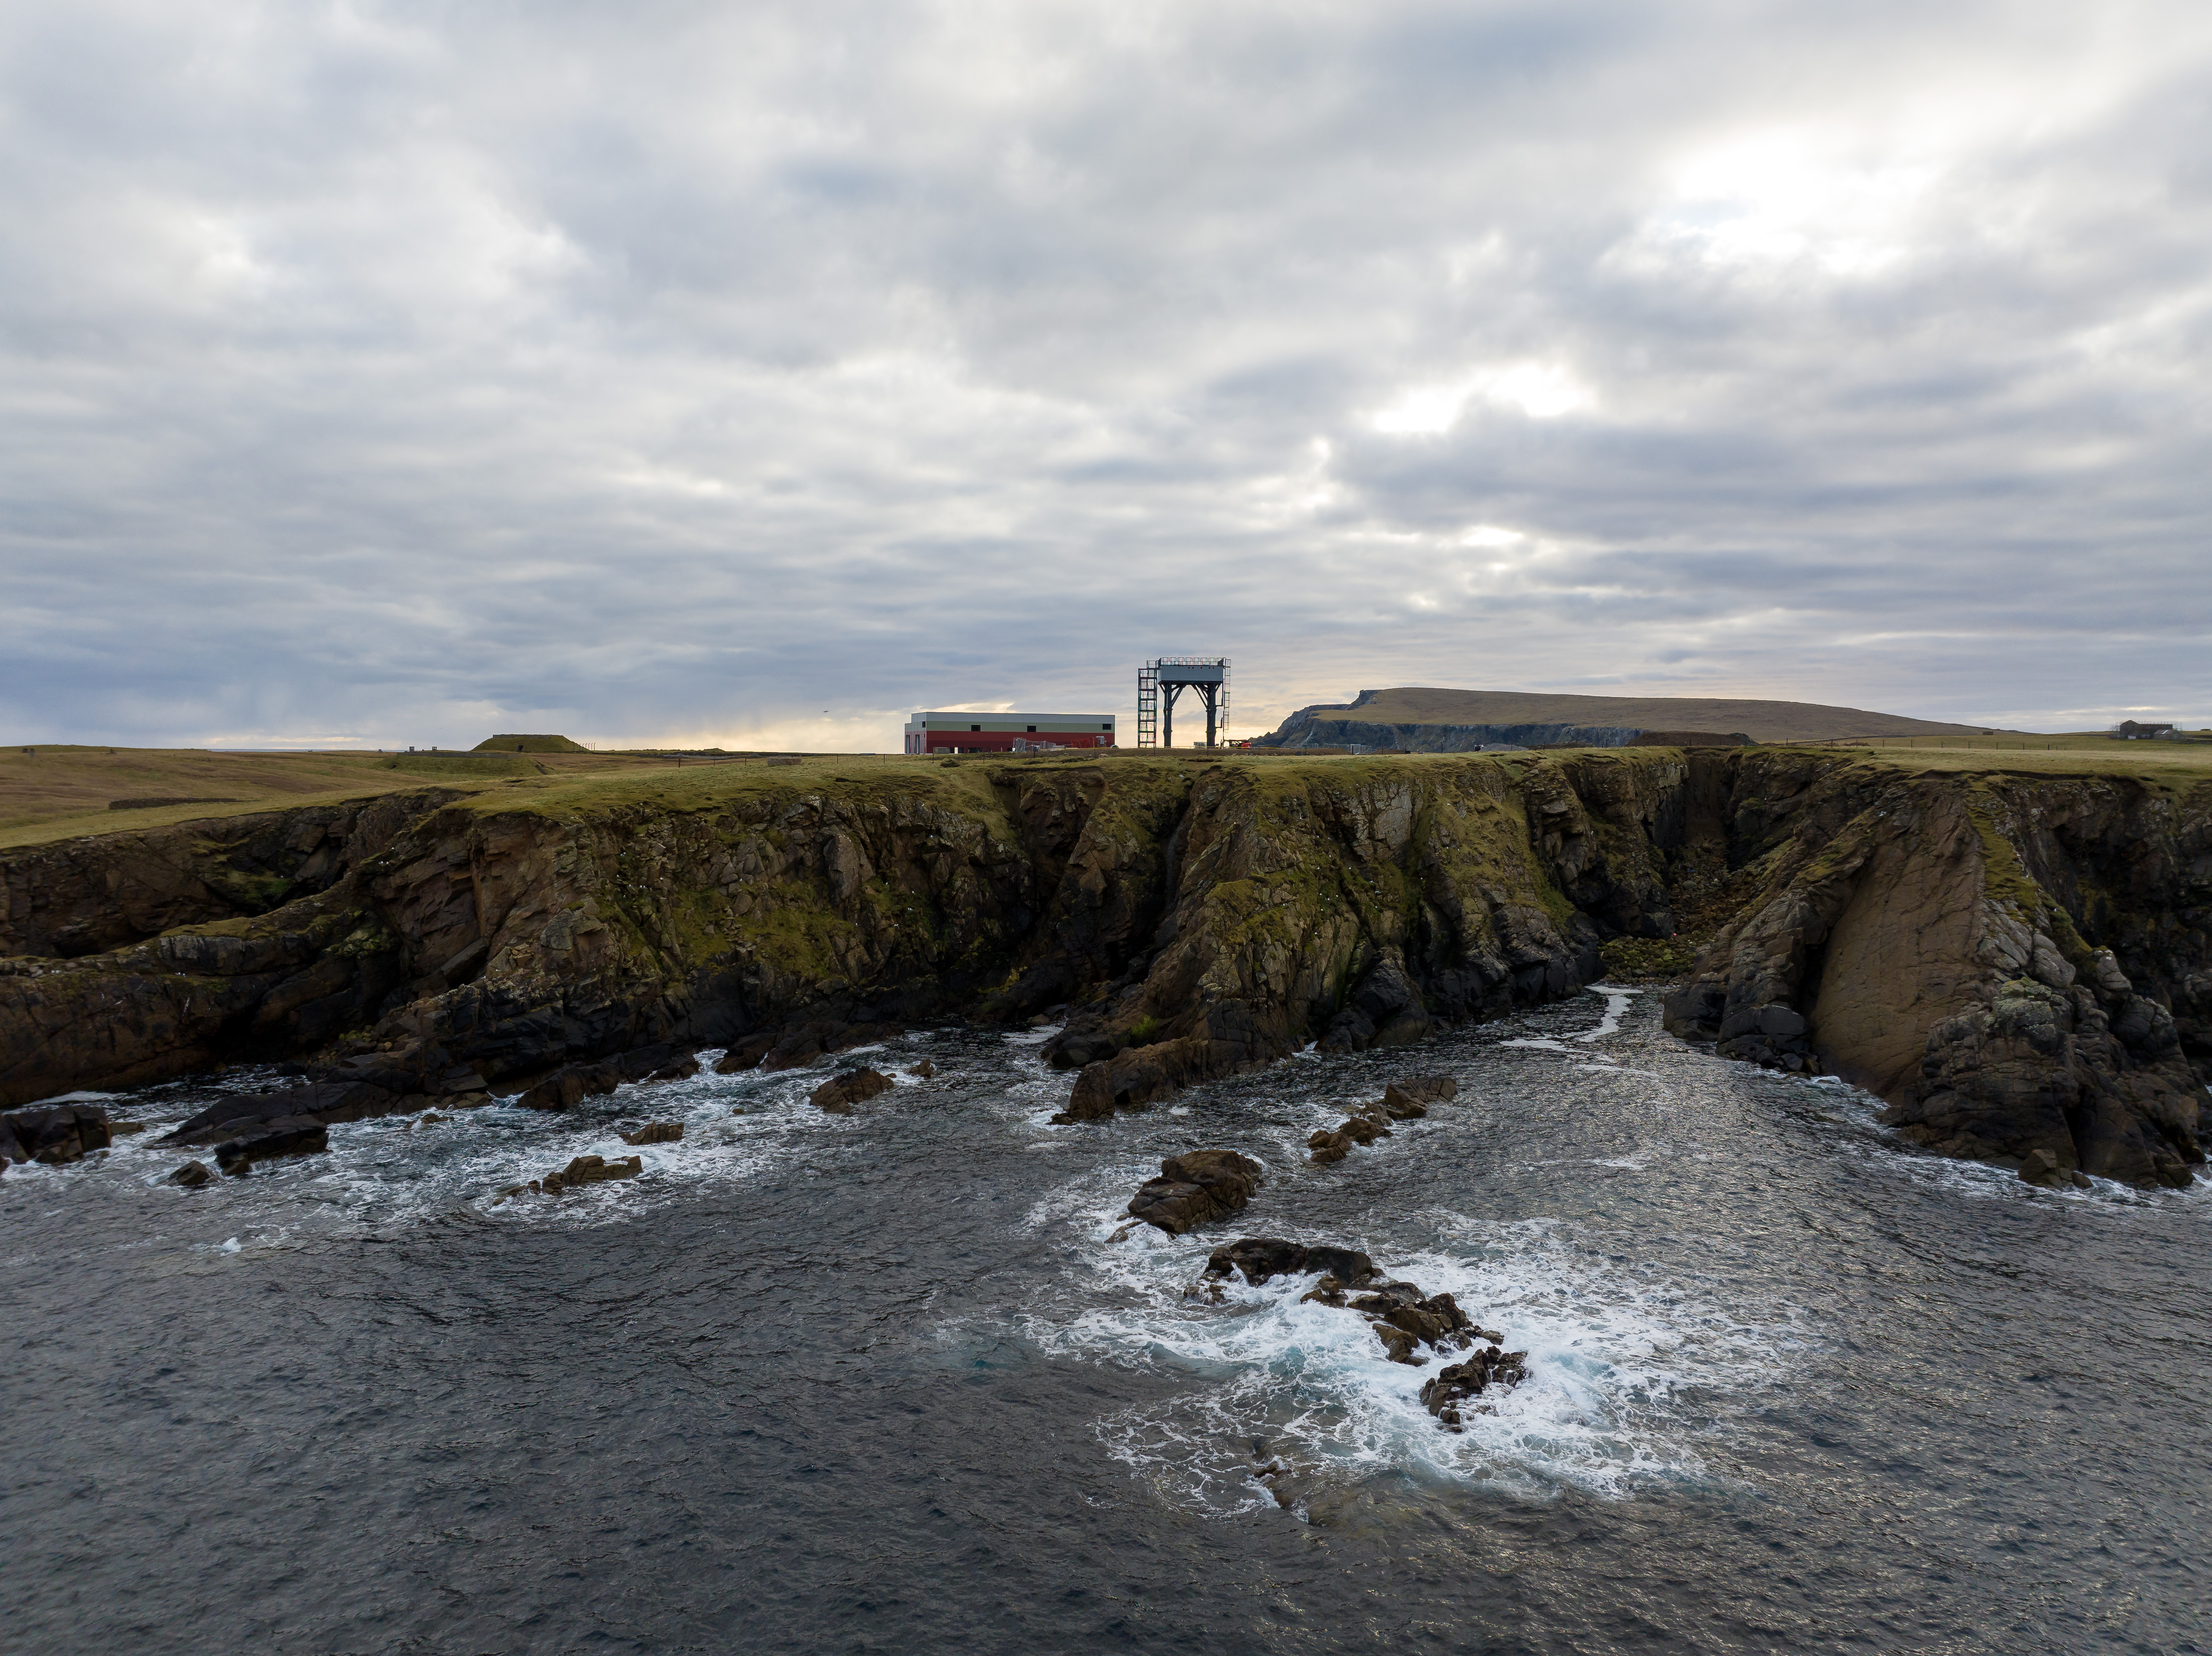 The SaxaVord space port on the edge of a cliff on the Lamba Ness peninsula, on the island Unst.